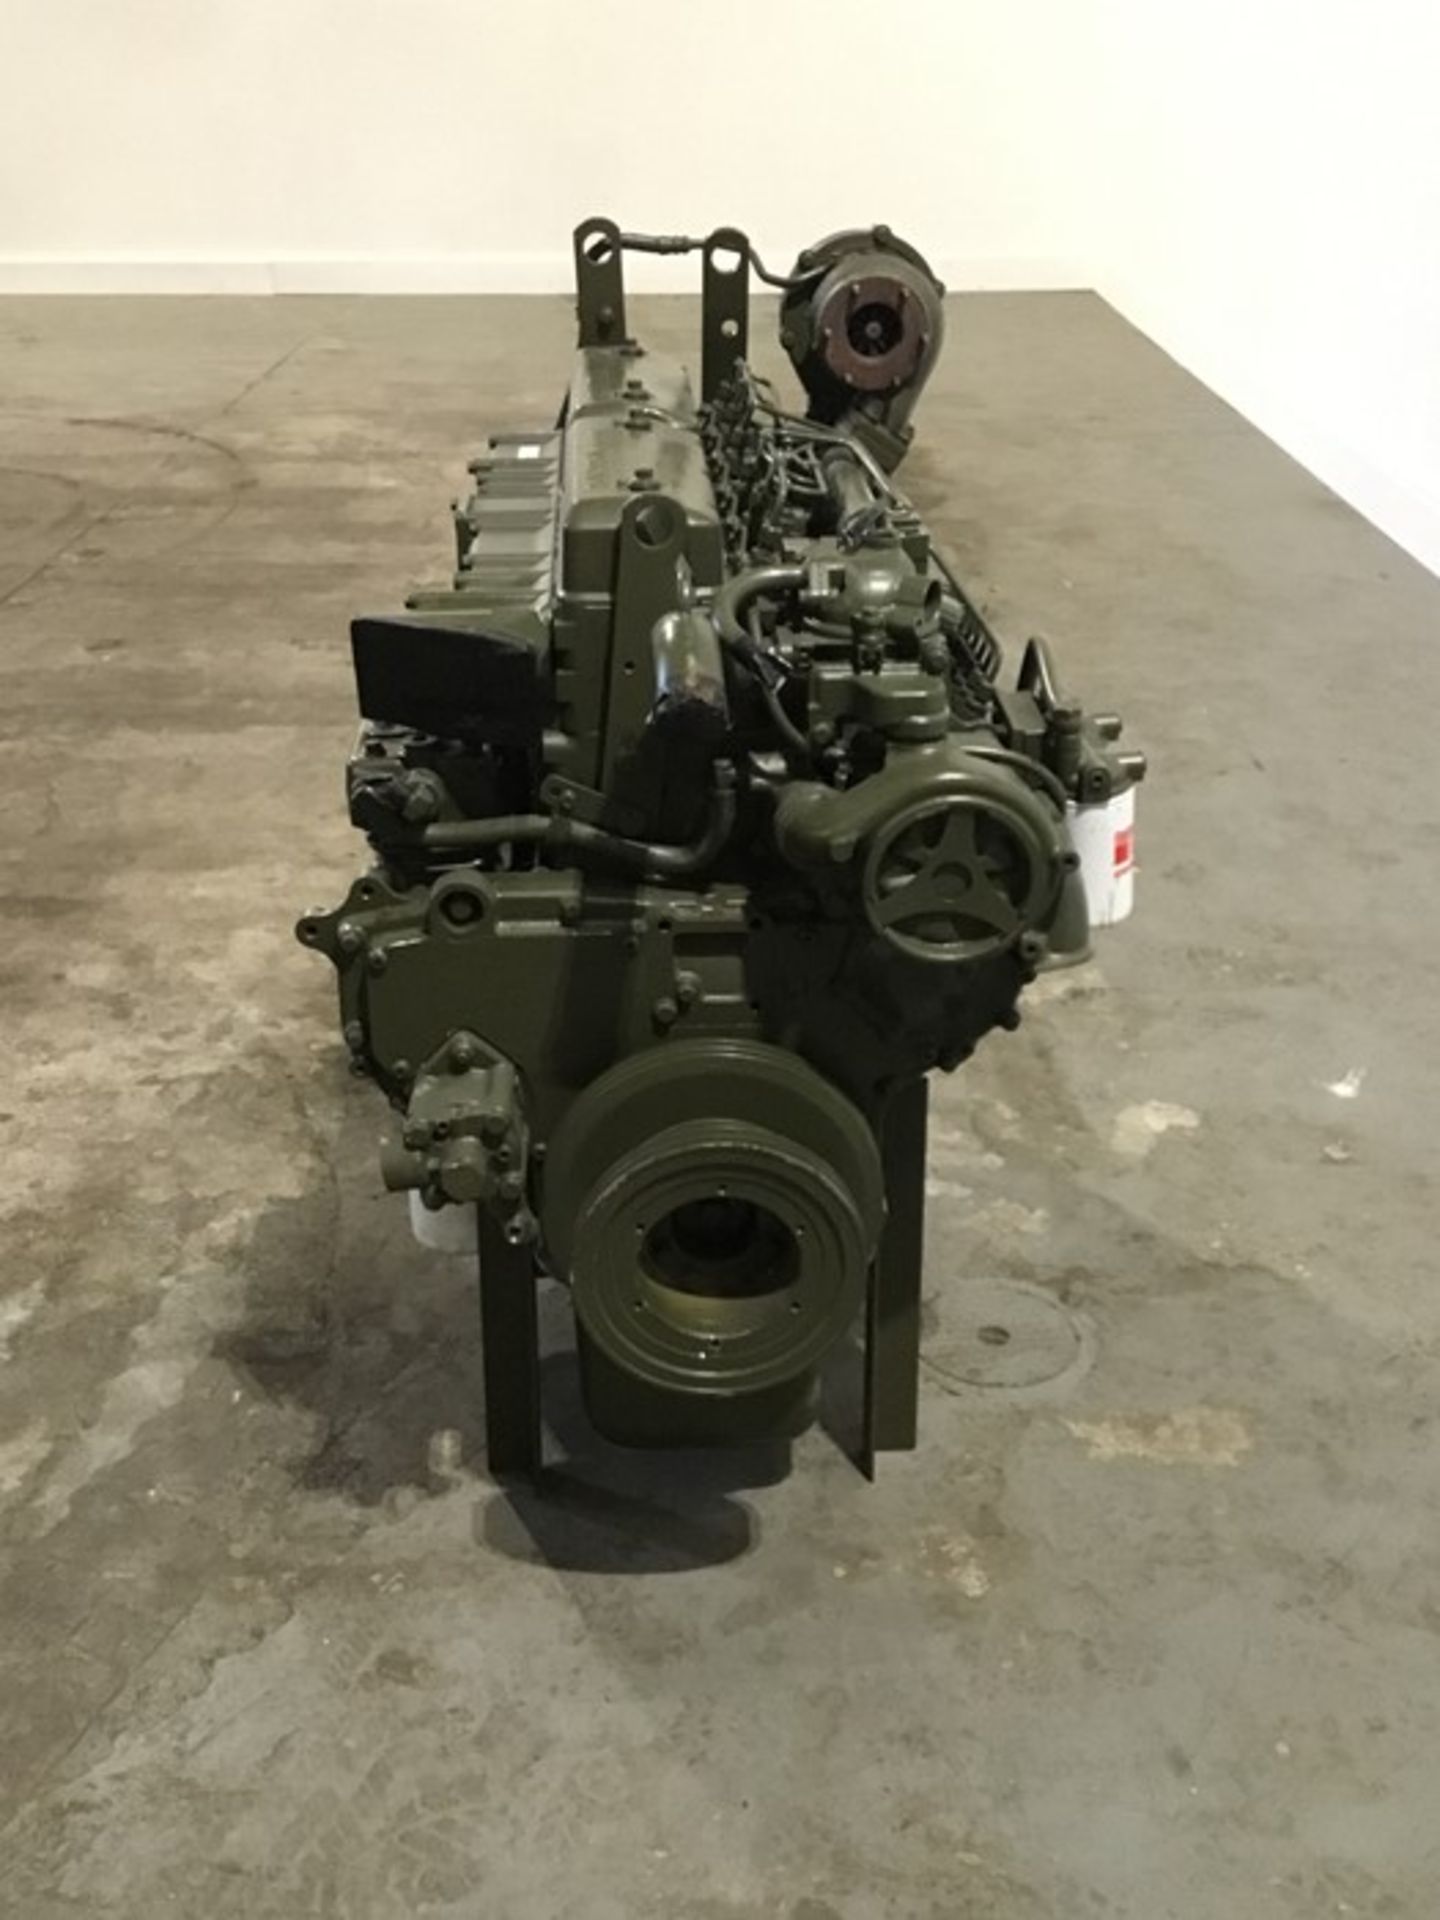 Volvo D6 Diesel Engine: Volvo D6 6Cyl Turbo low hours - Image 9 of 18